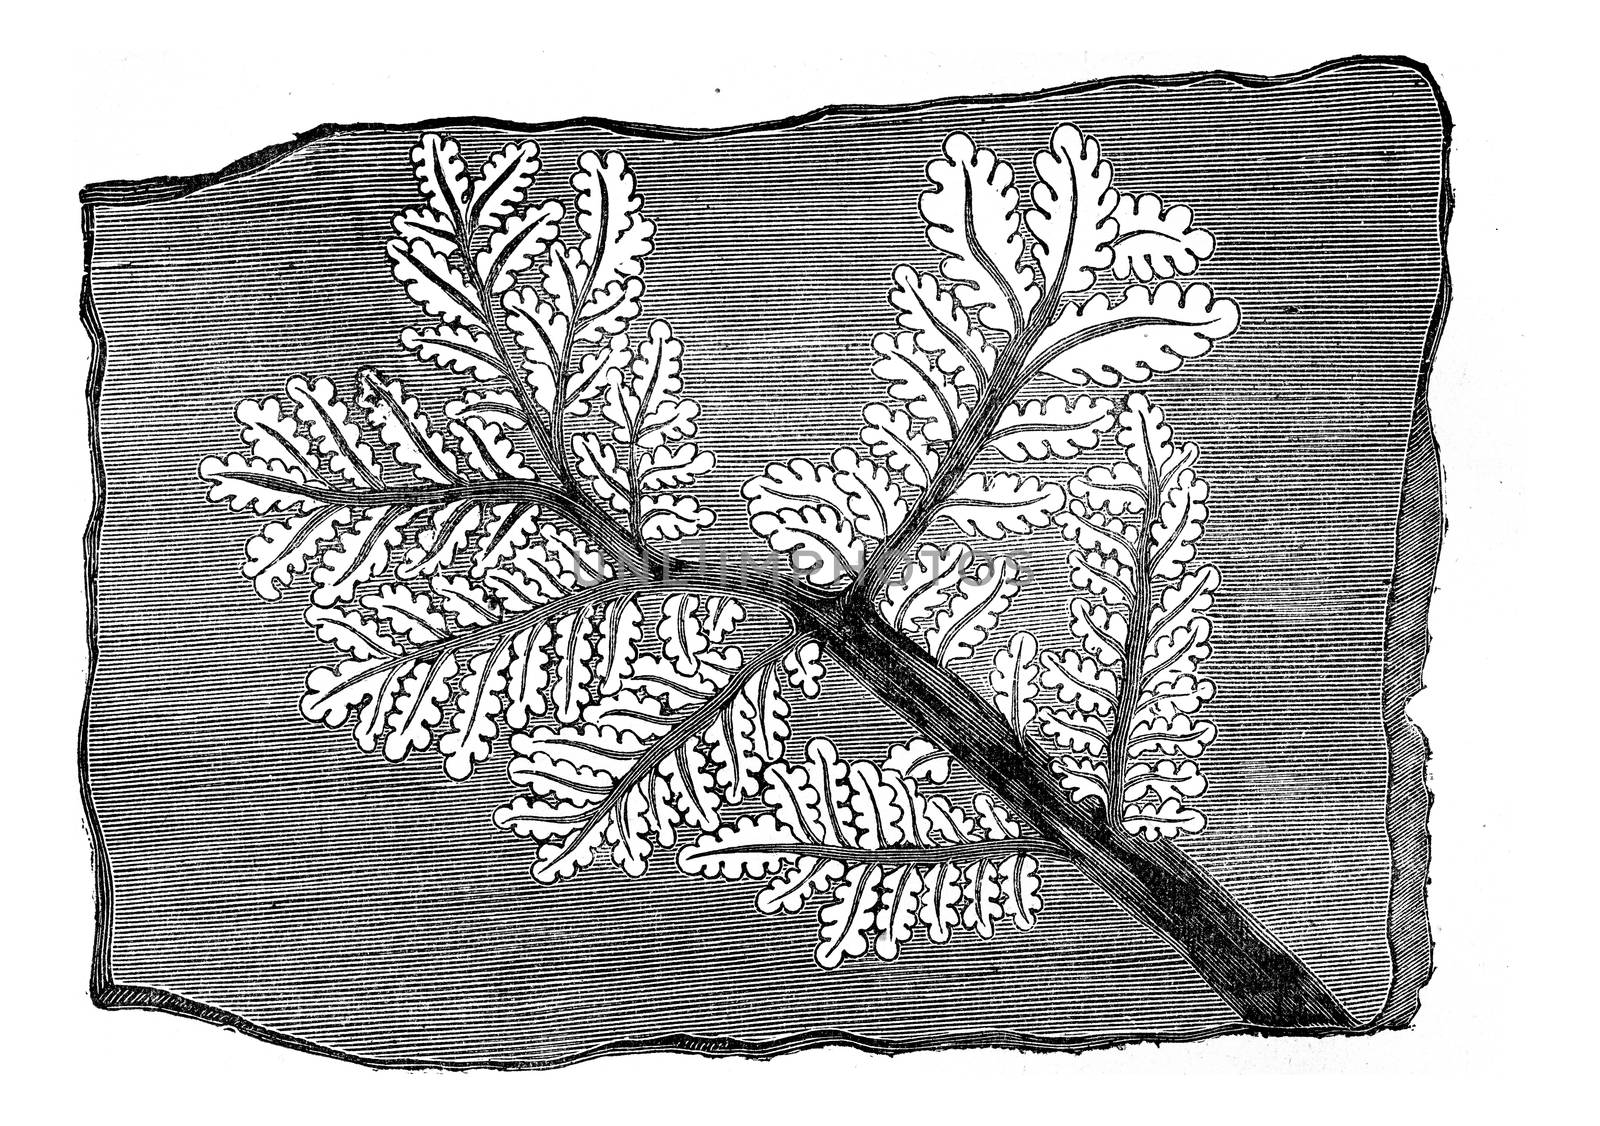 Trace fossil fern, vintage engraving. by Morphart